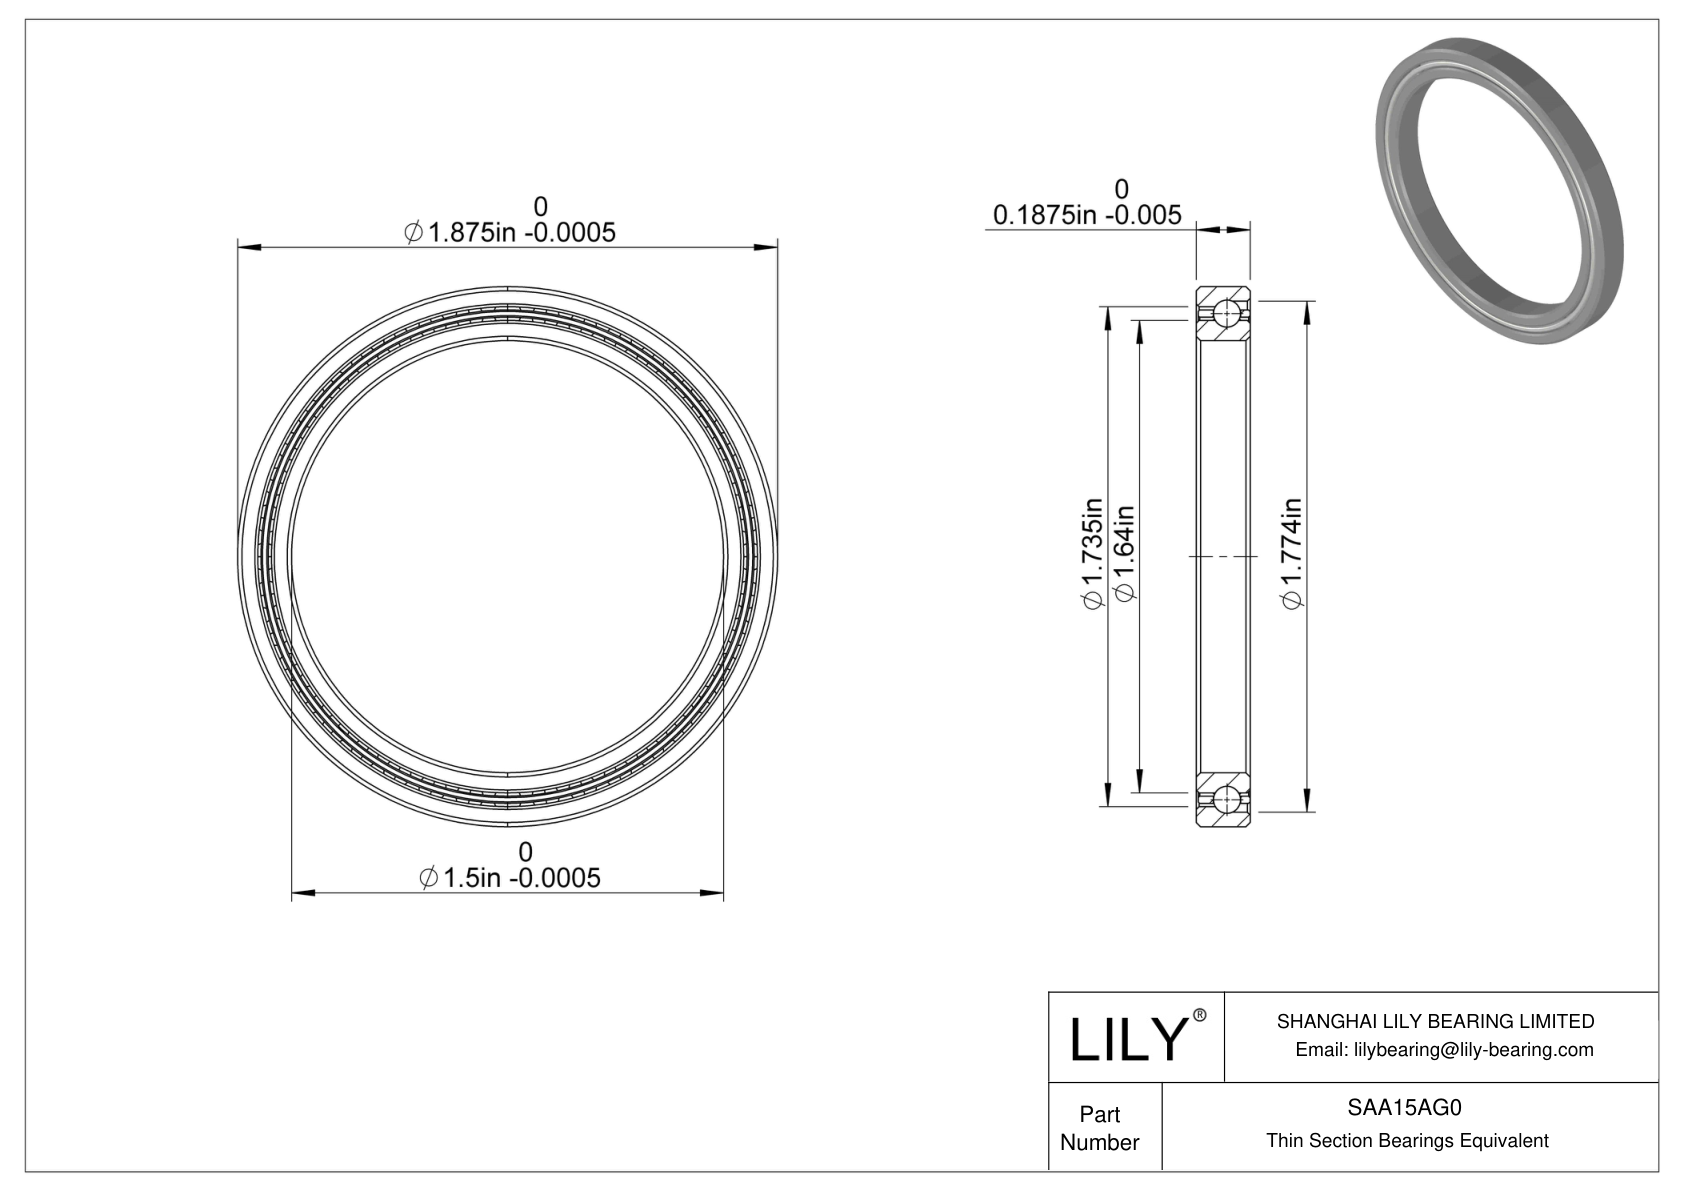 SAA15AG0 Constant Section (CS) Bearings CAD图形